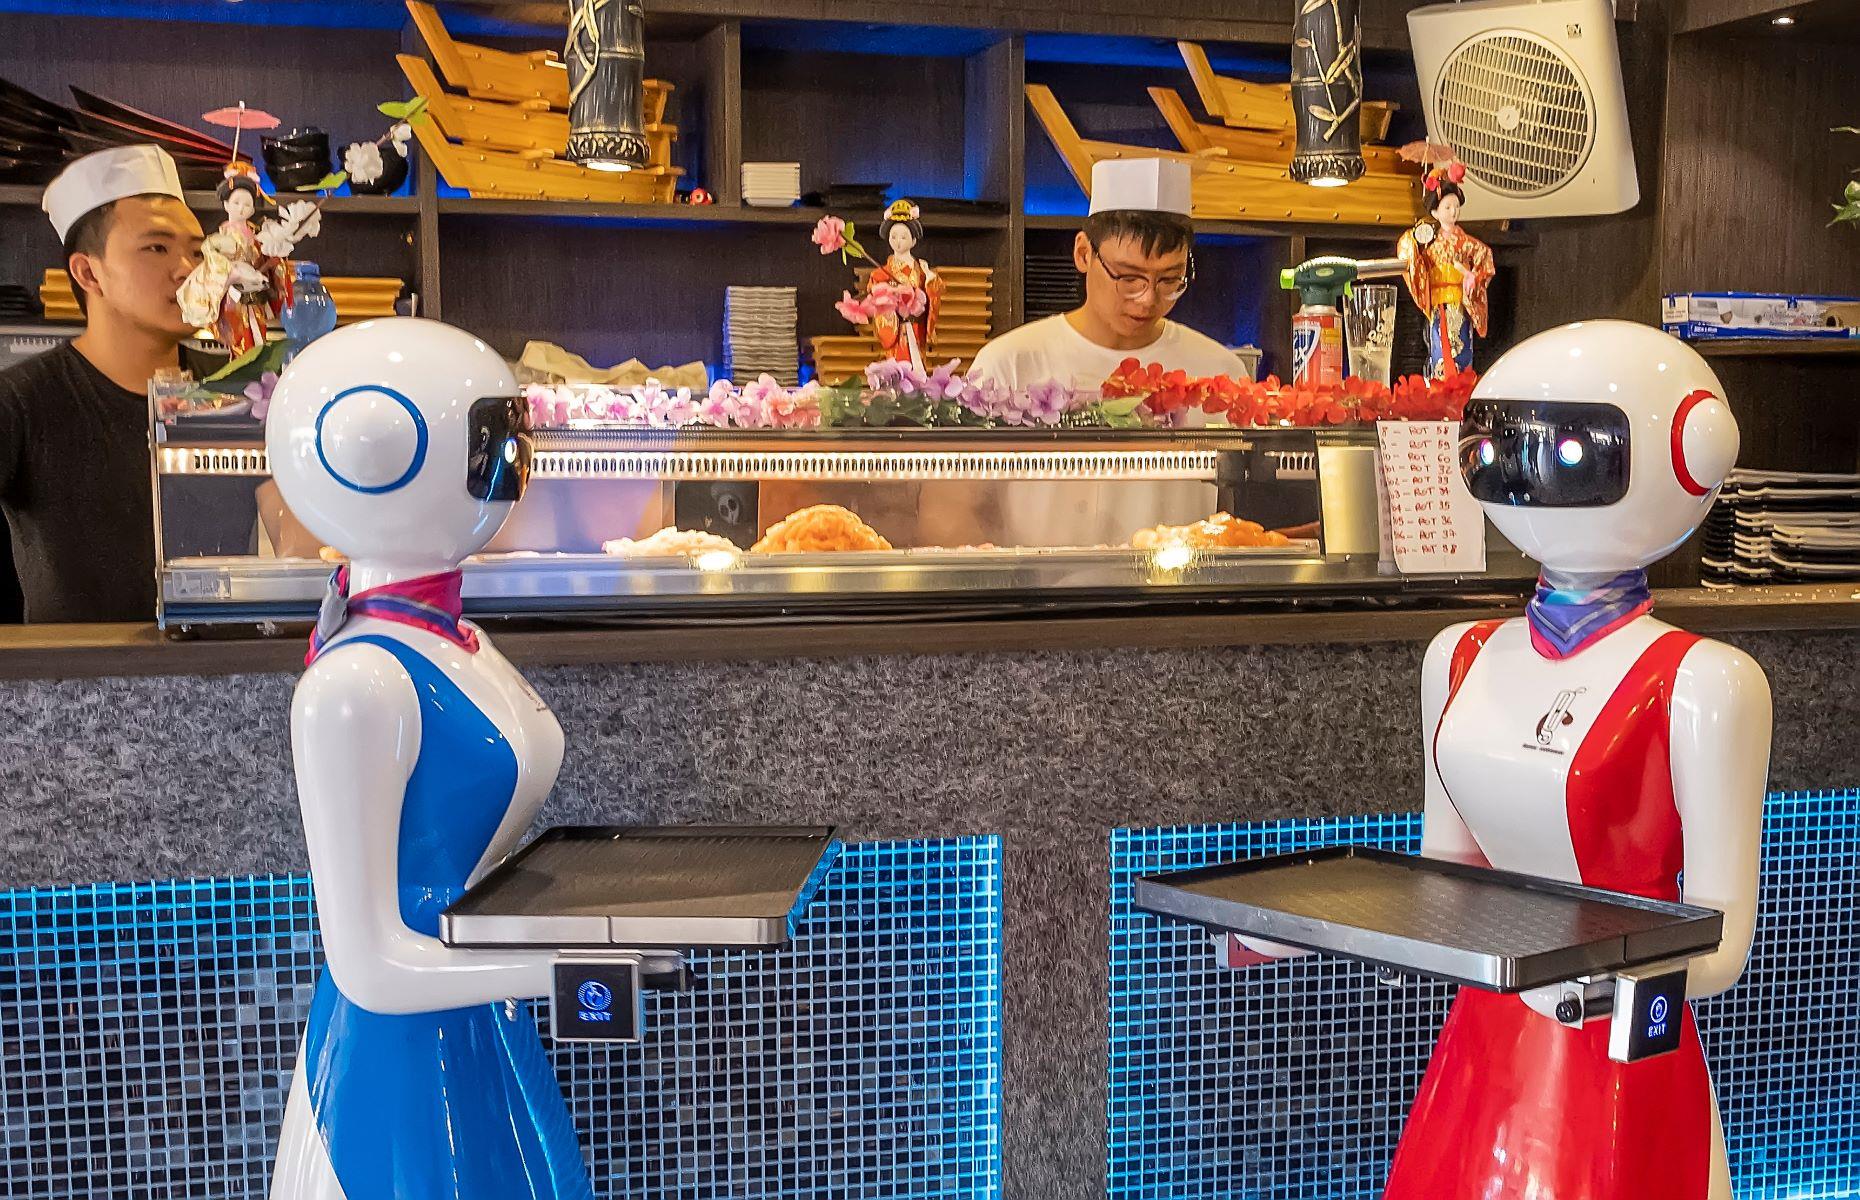 <p>Robot waiters are popping up all over the world, from the Gran Caffè Rapallo in Italy (pictured) to a care home in Delaware County, USA. Programmed to collect and deliver food, these robots range from the humanoid to the purely functional.</p>